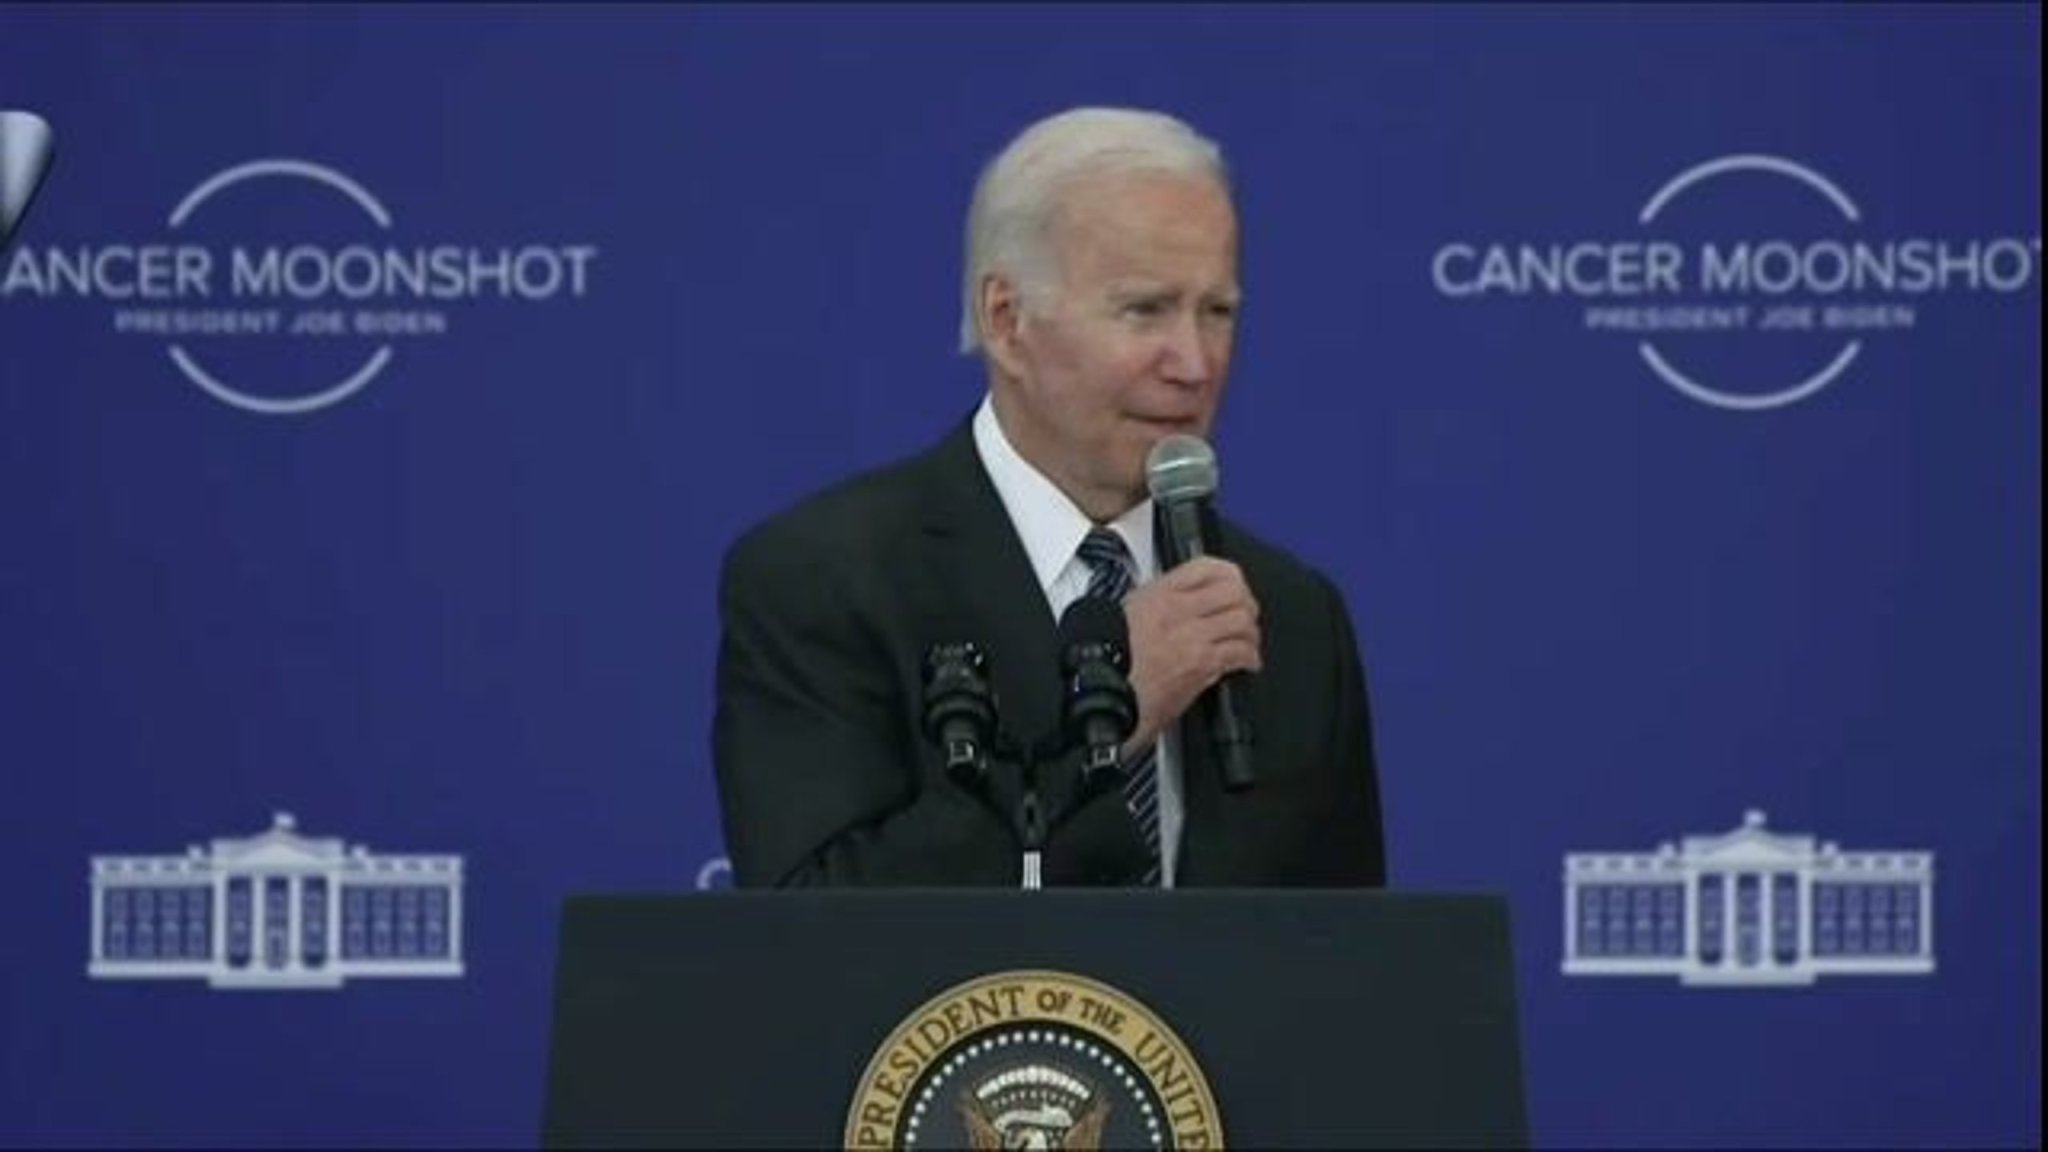 President Biden: "I believe we can ... end cancer as we know it and even cure cancers once and for all."